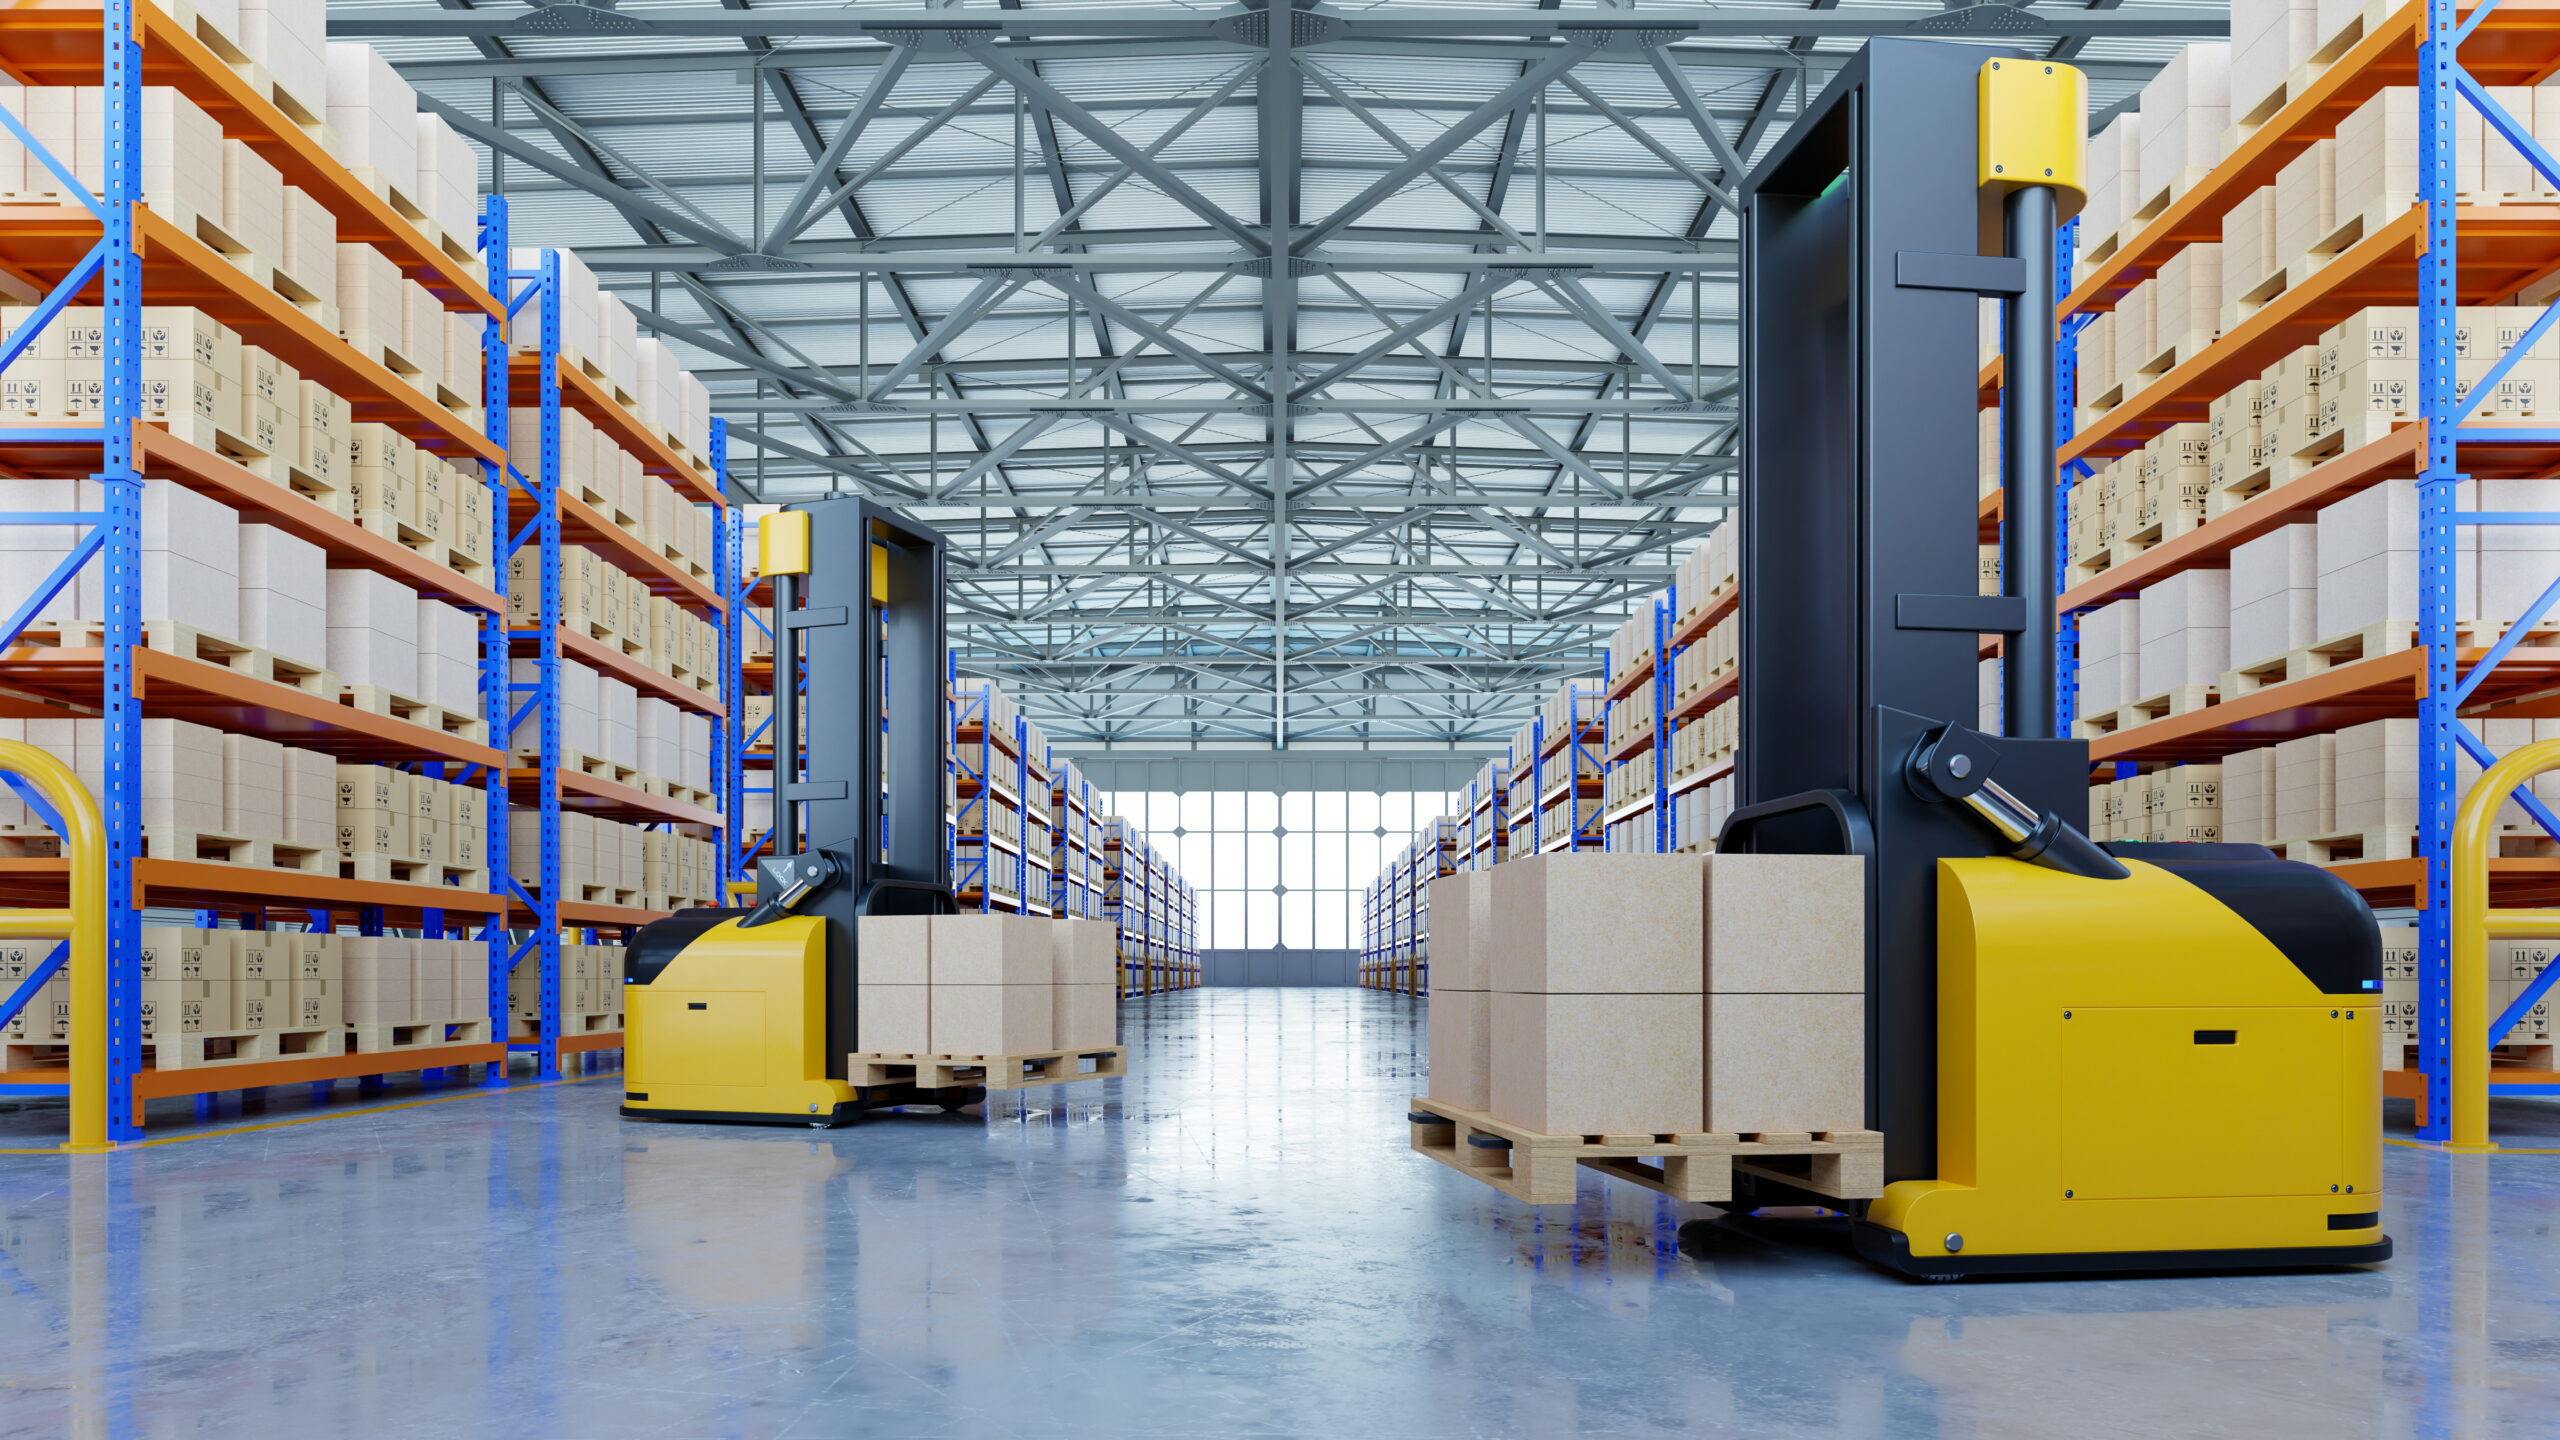 modern warehouse with AGV forklifts and high shelves
